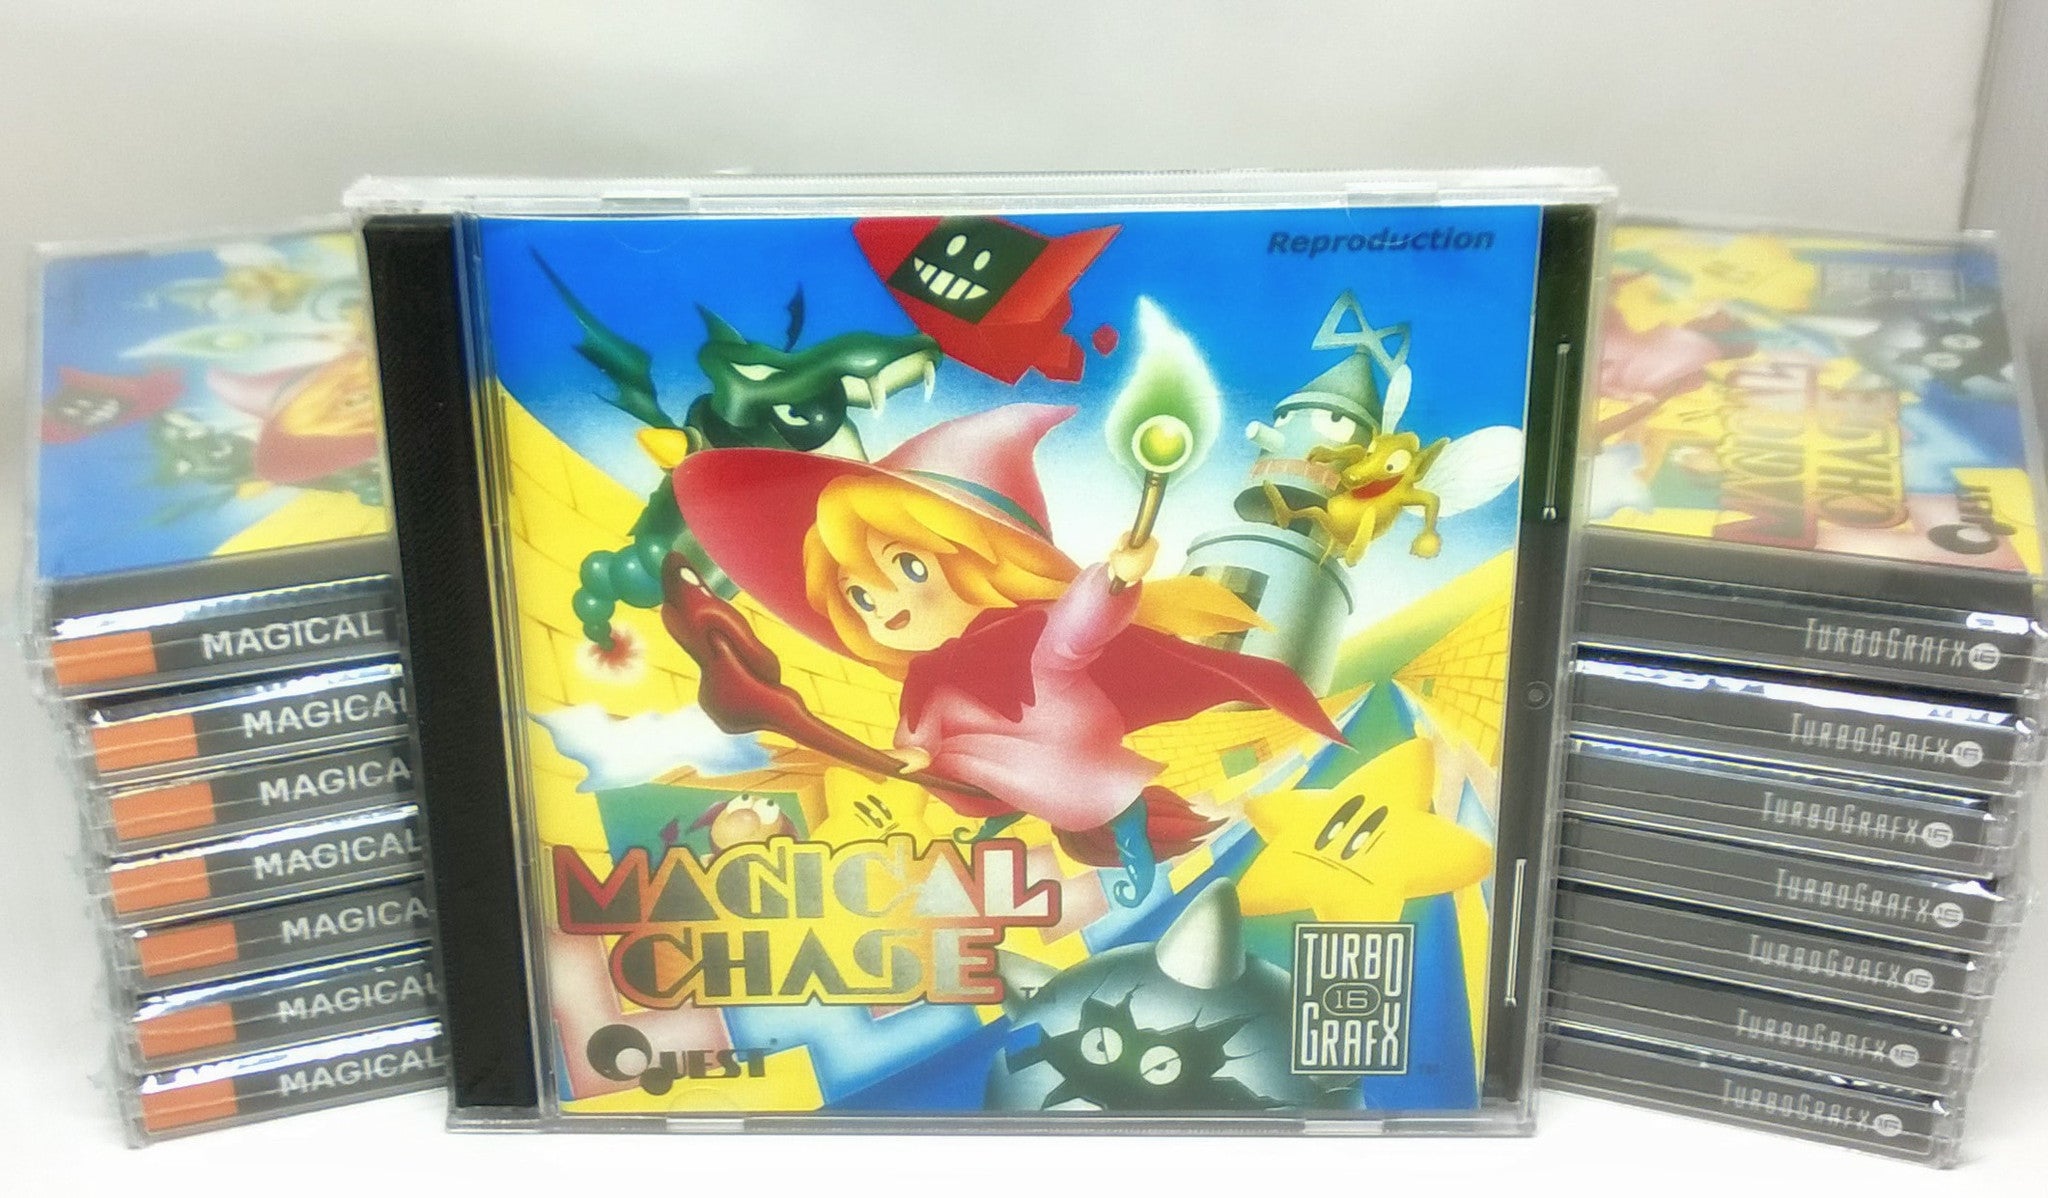 Magical Chase Repro back in stock!